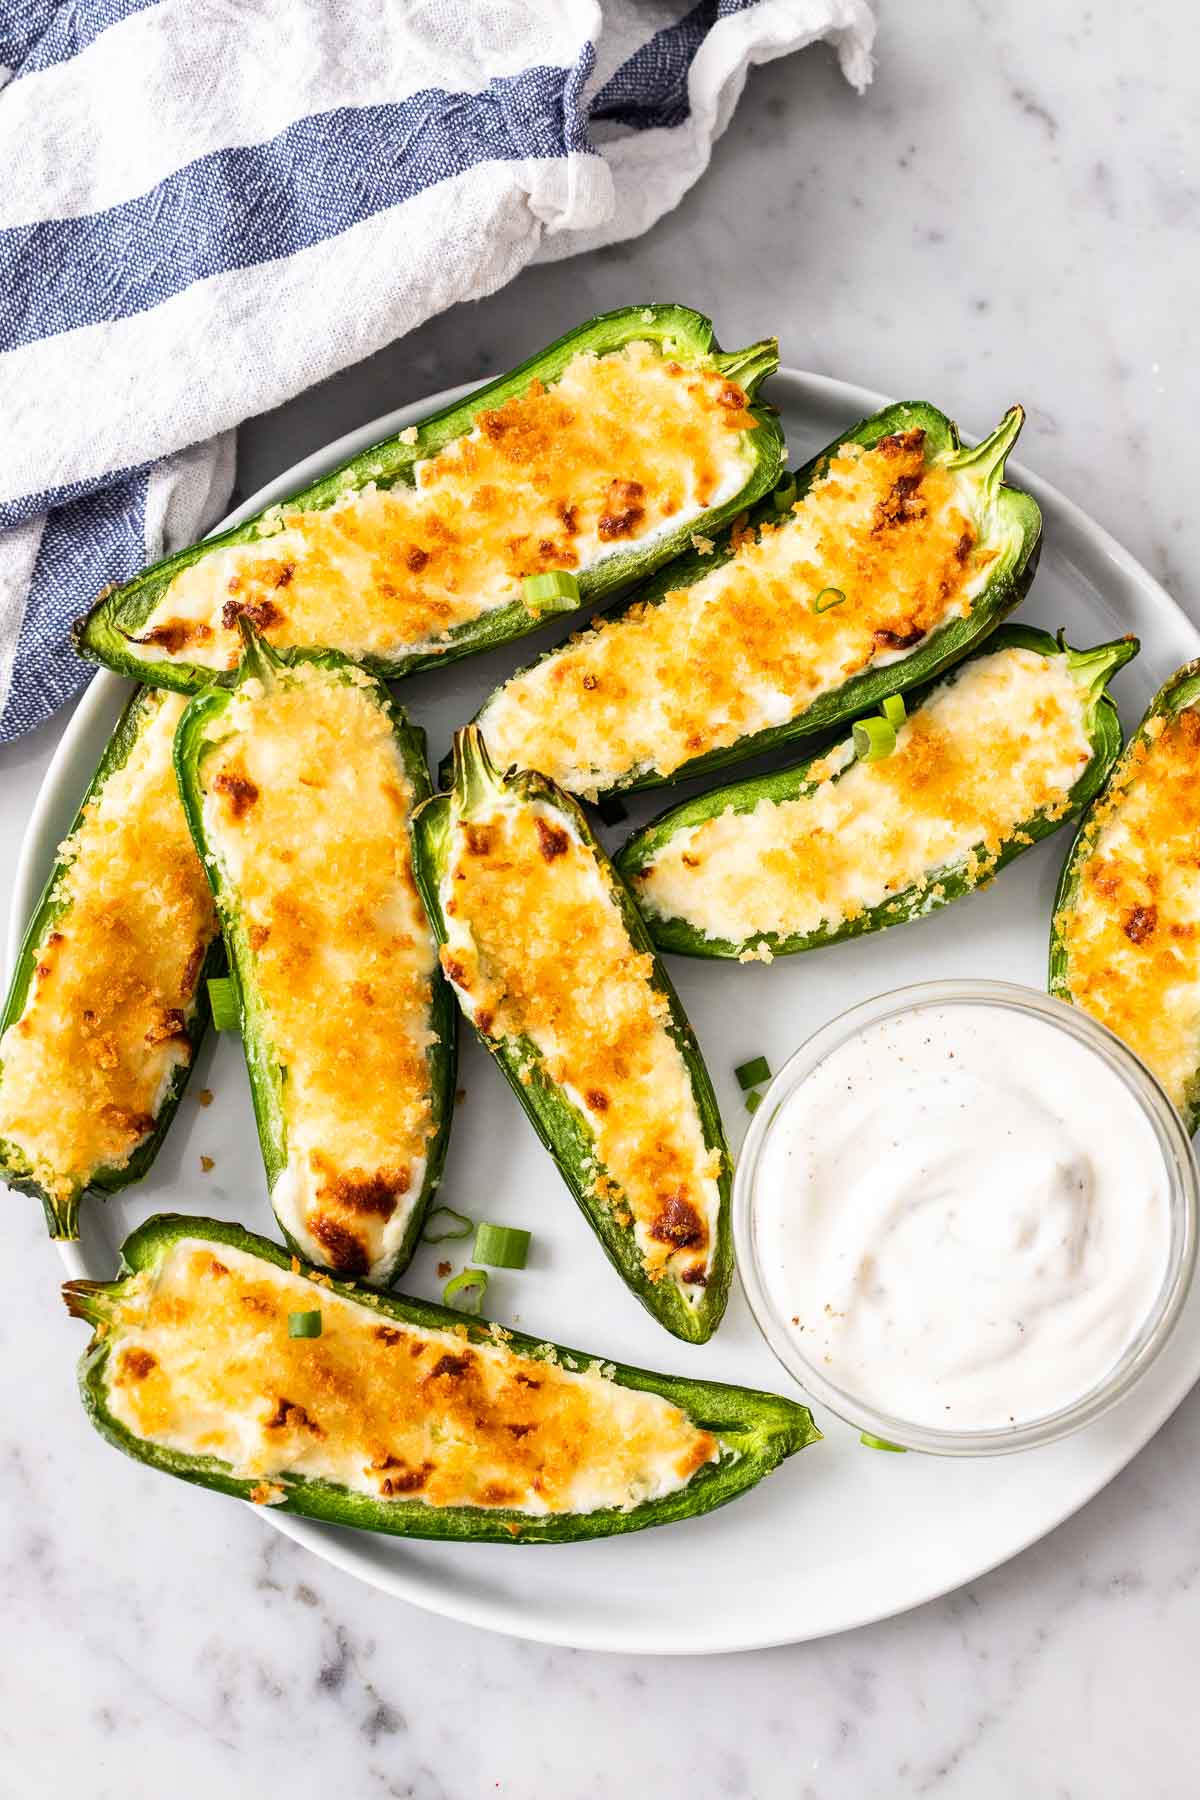 Jalapeno Poppers arranged on a white plate with a small bowl filled with a dip next to it